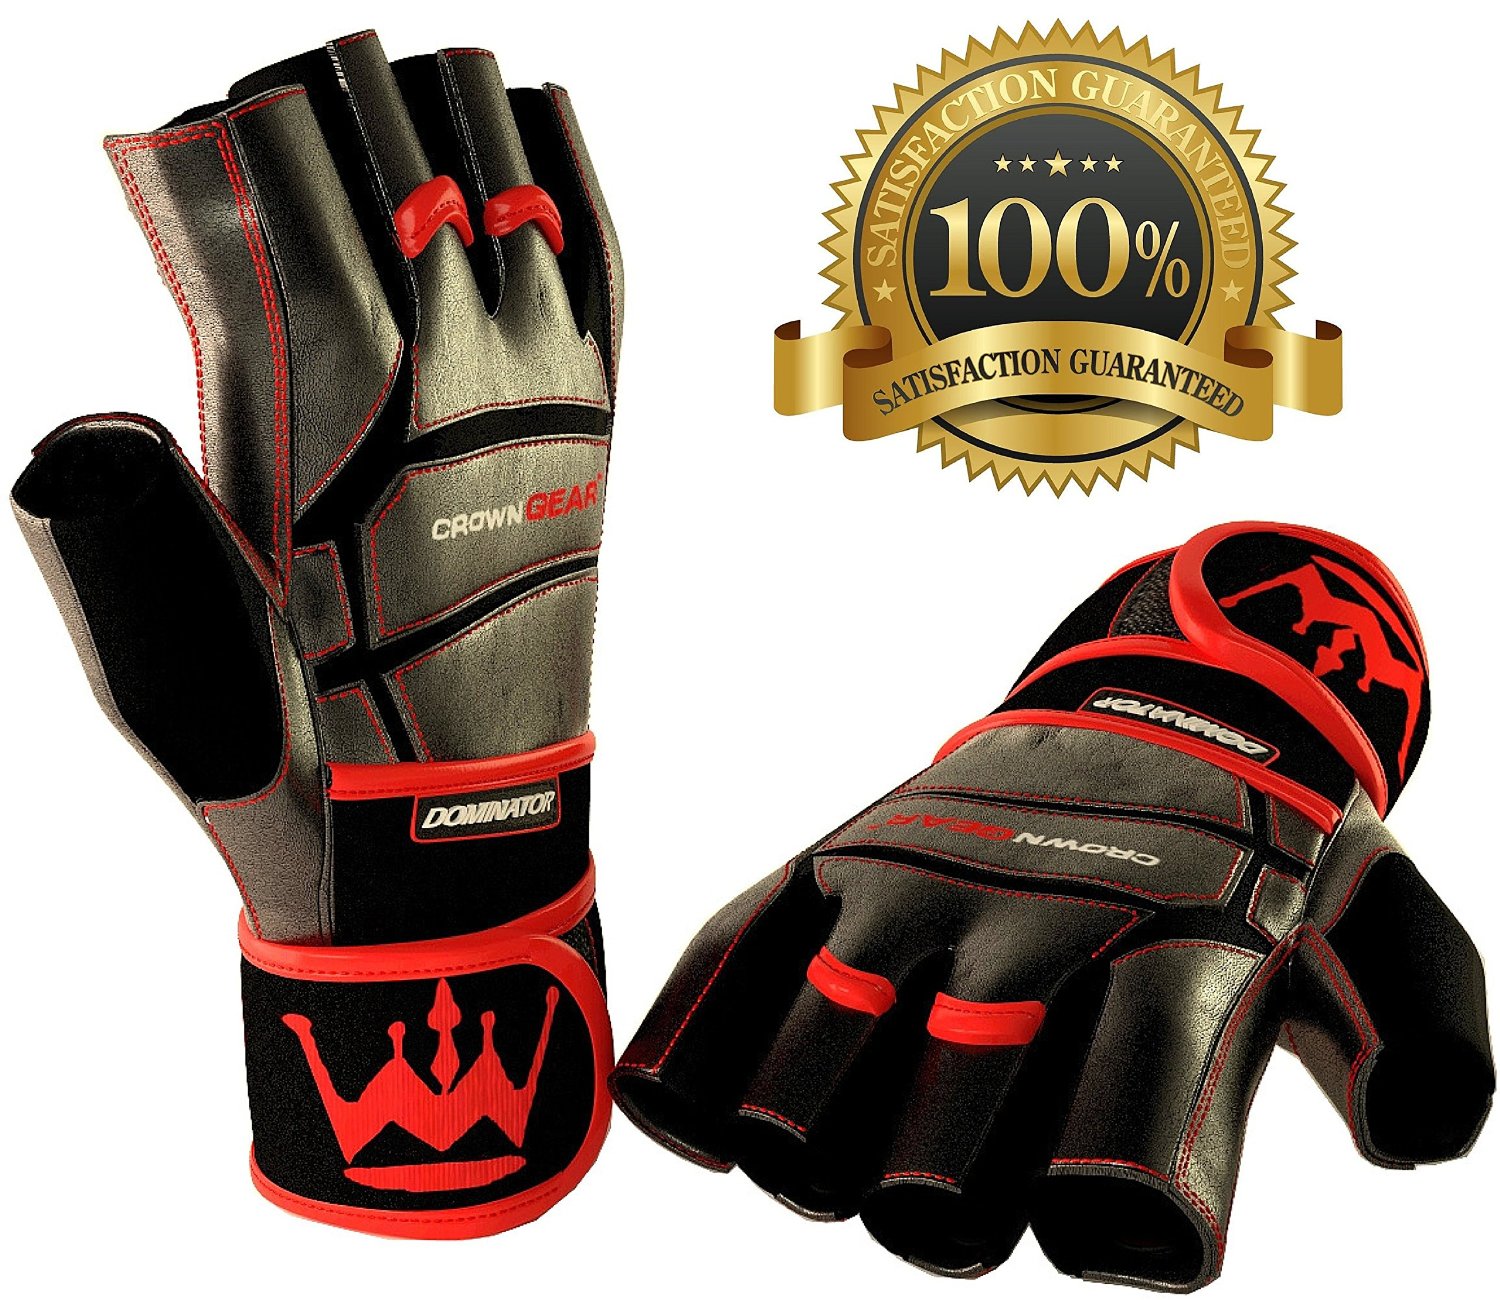 Crown Gear Dominator Weight Lifting Gloves